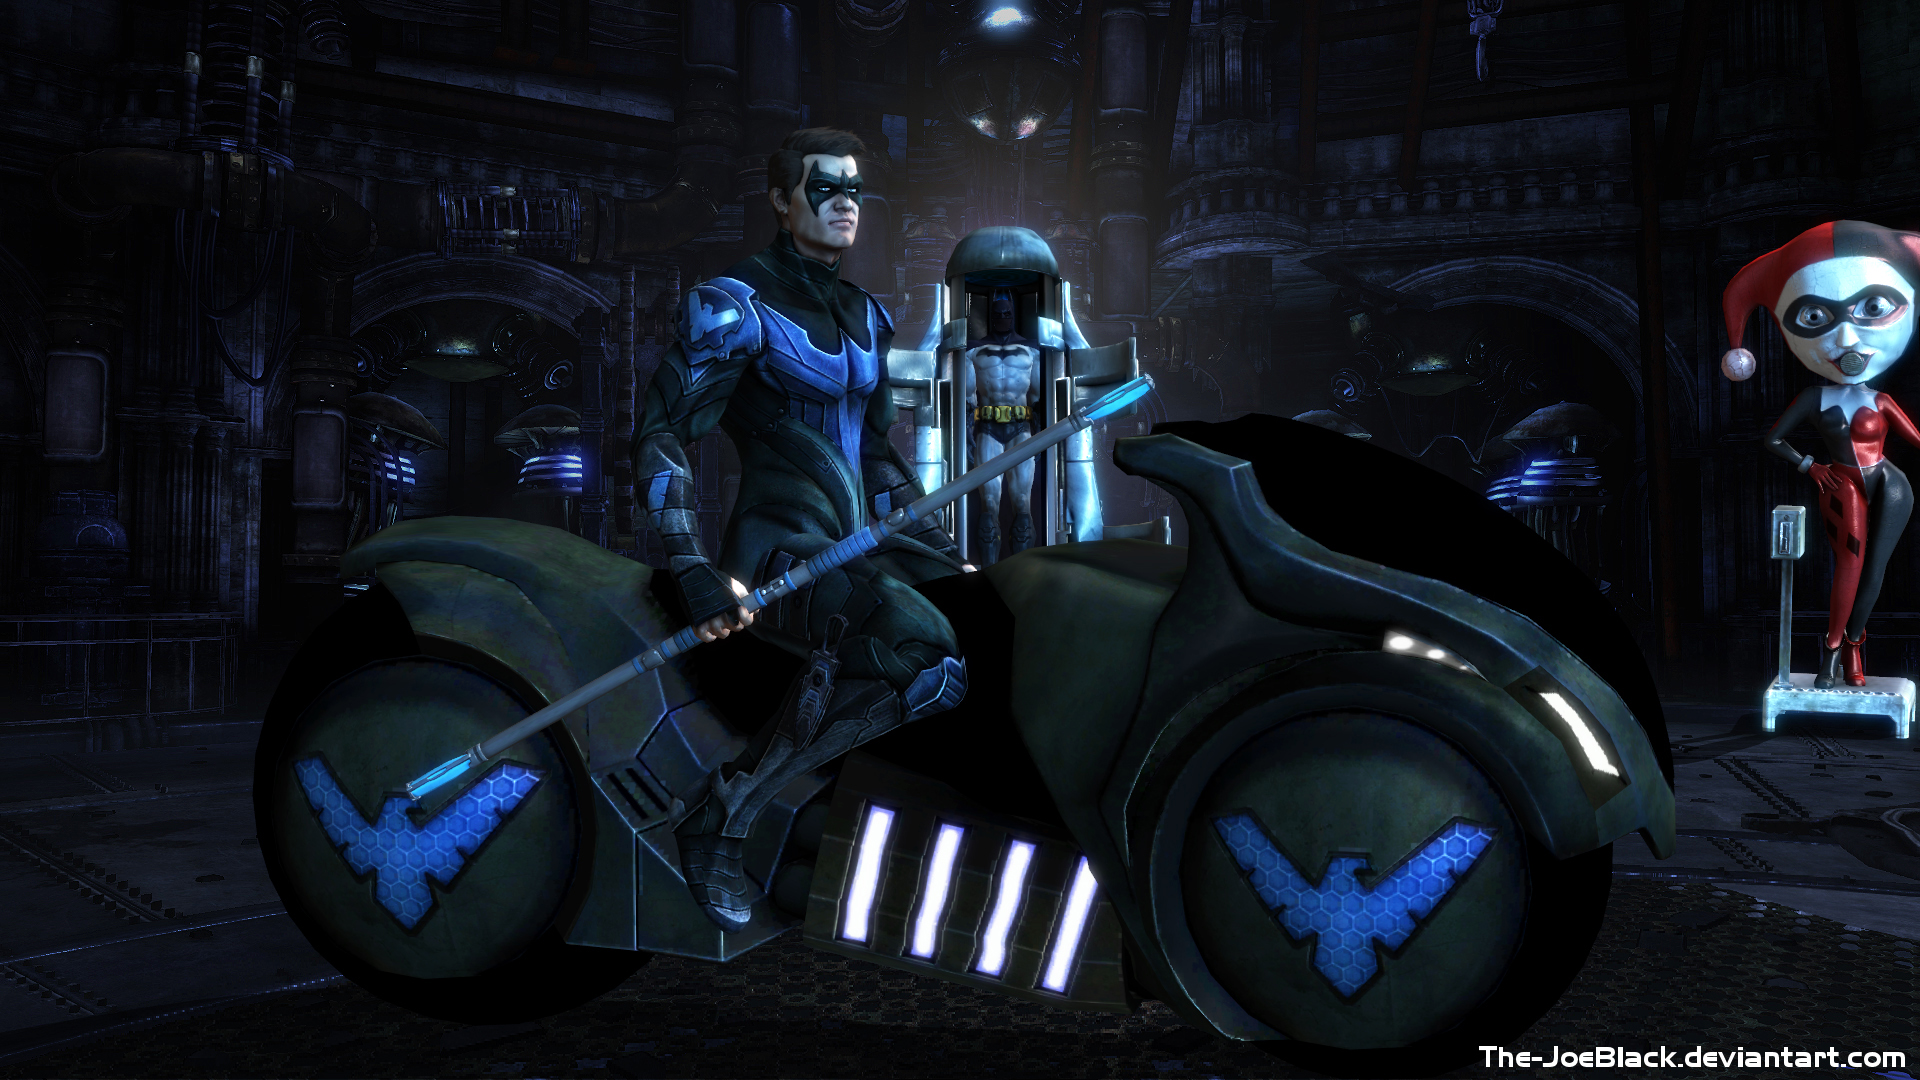 Injustice Nightwing wallpaper by The JoeBlack on